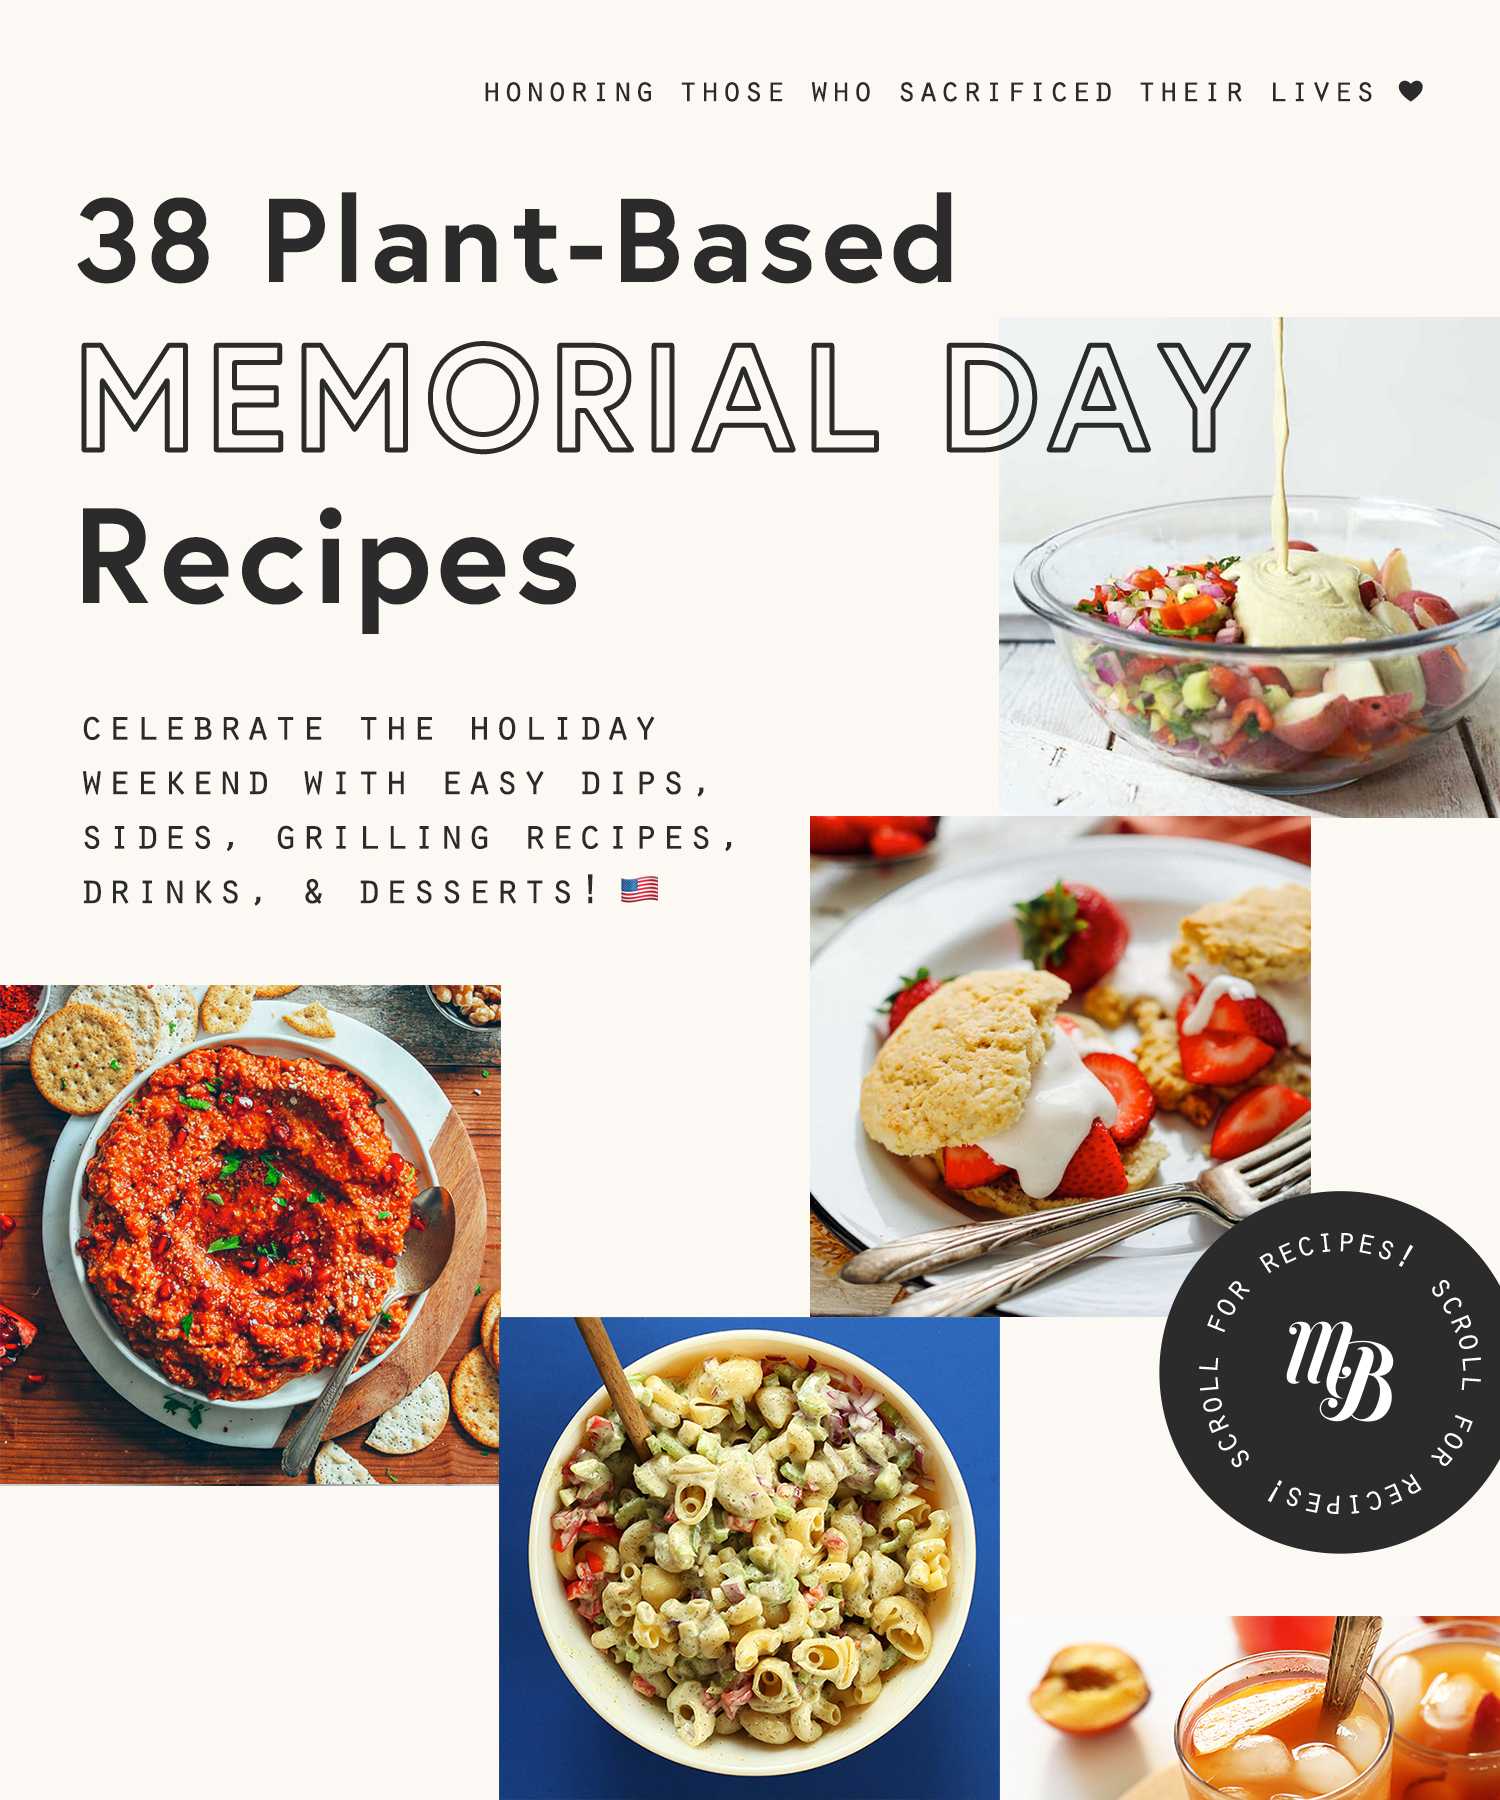 Salads, dips, drinks, and desserts for Memorial Day